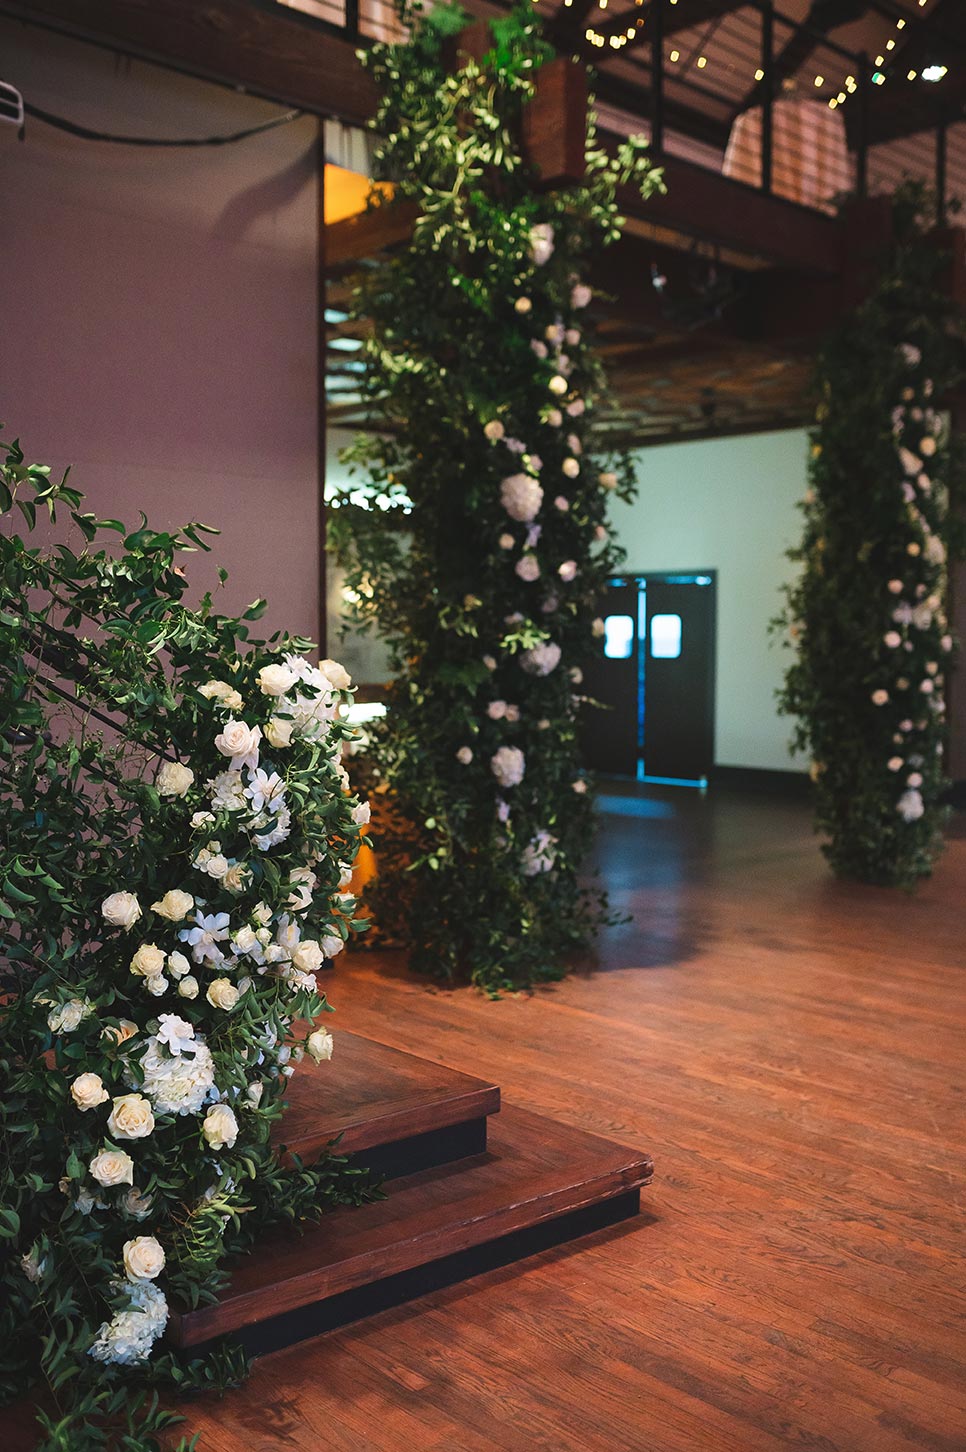 Floral display with greenery and white roses on the stairwell and entrance pillars